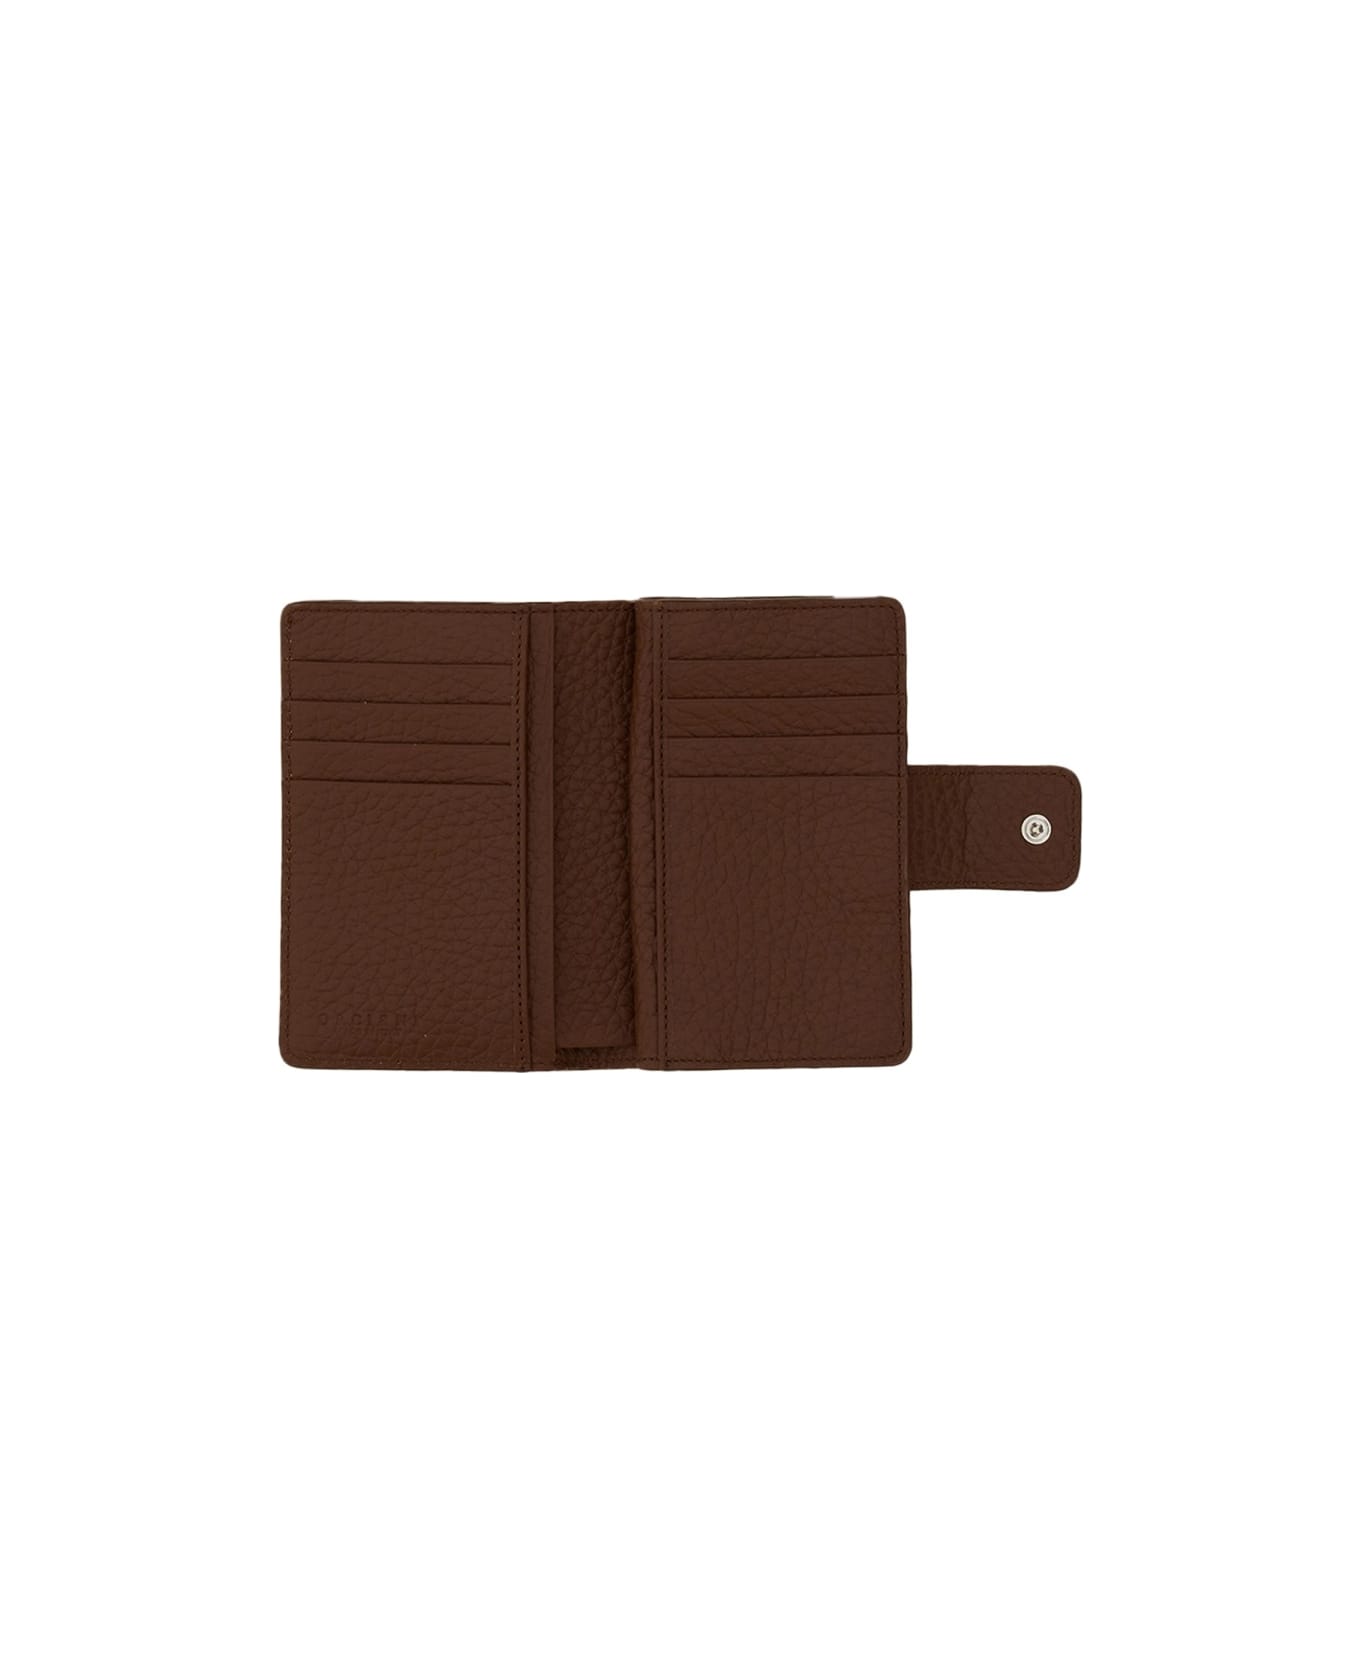 Orciani Soft Wallet - BROWN 財布